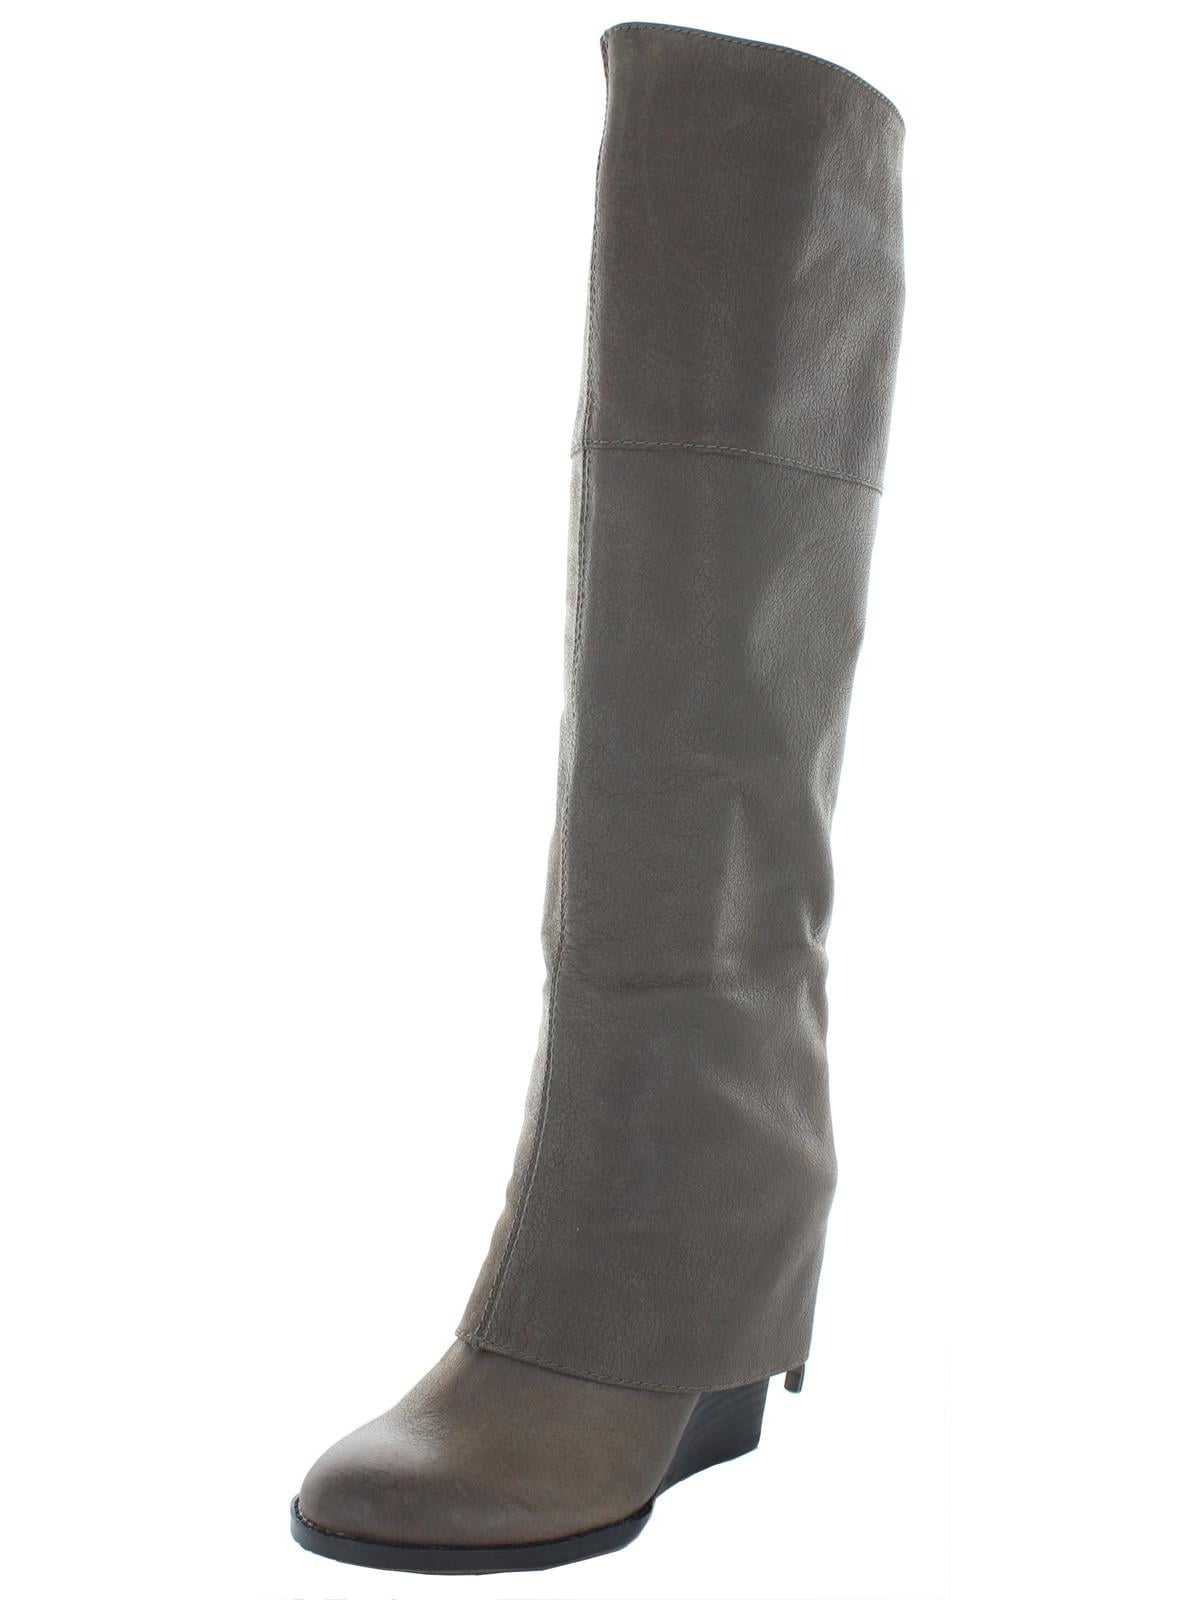 vince camuto wedge boots